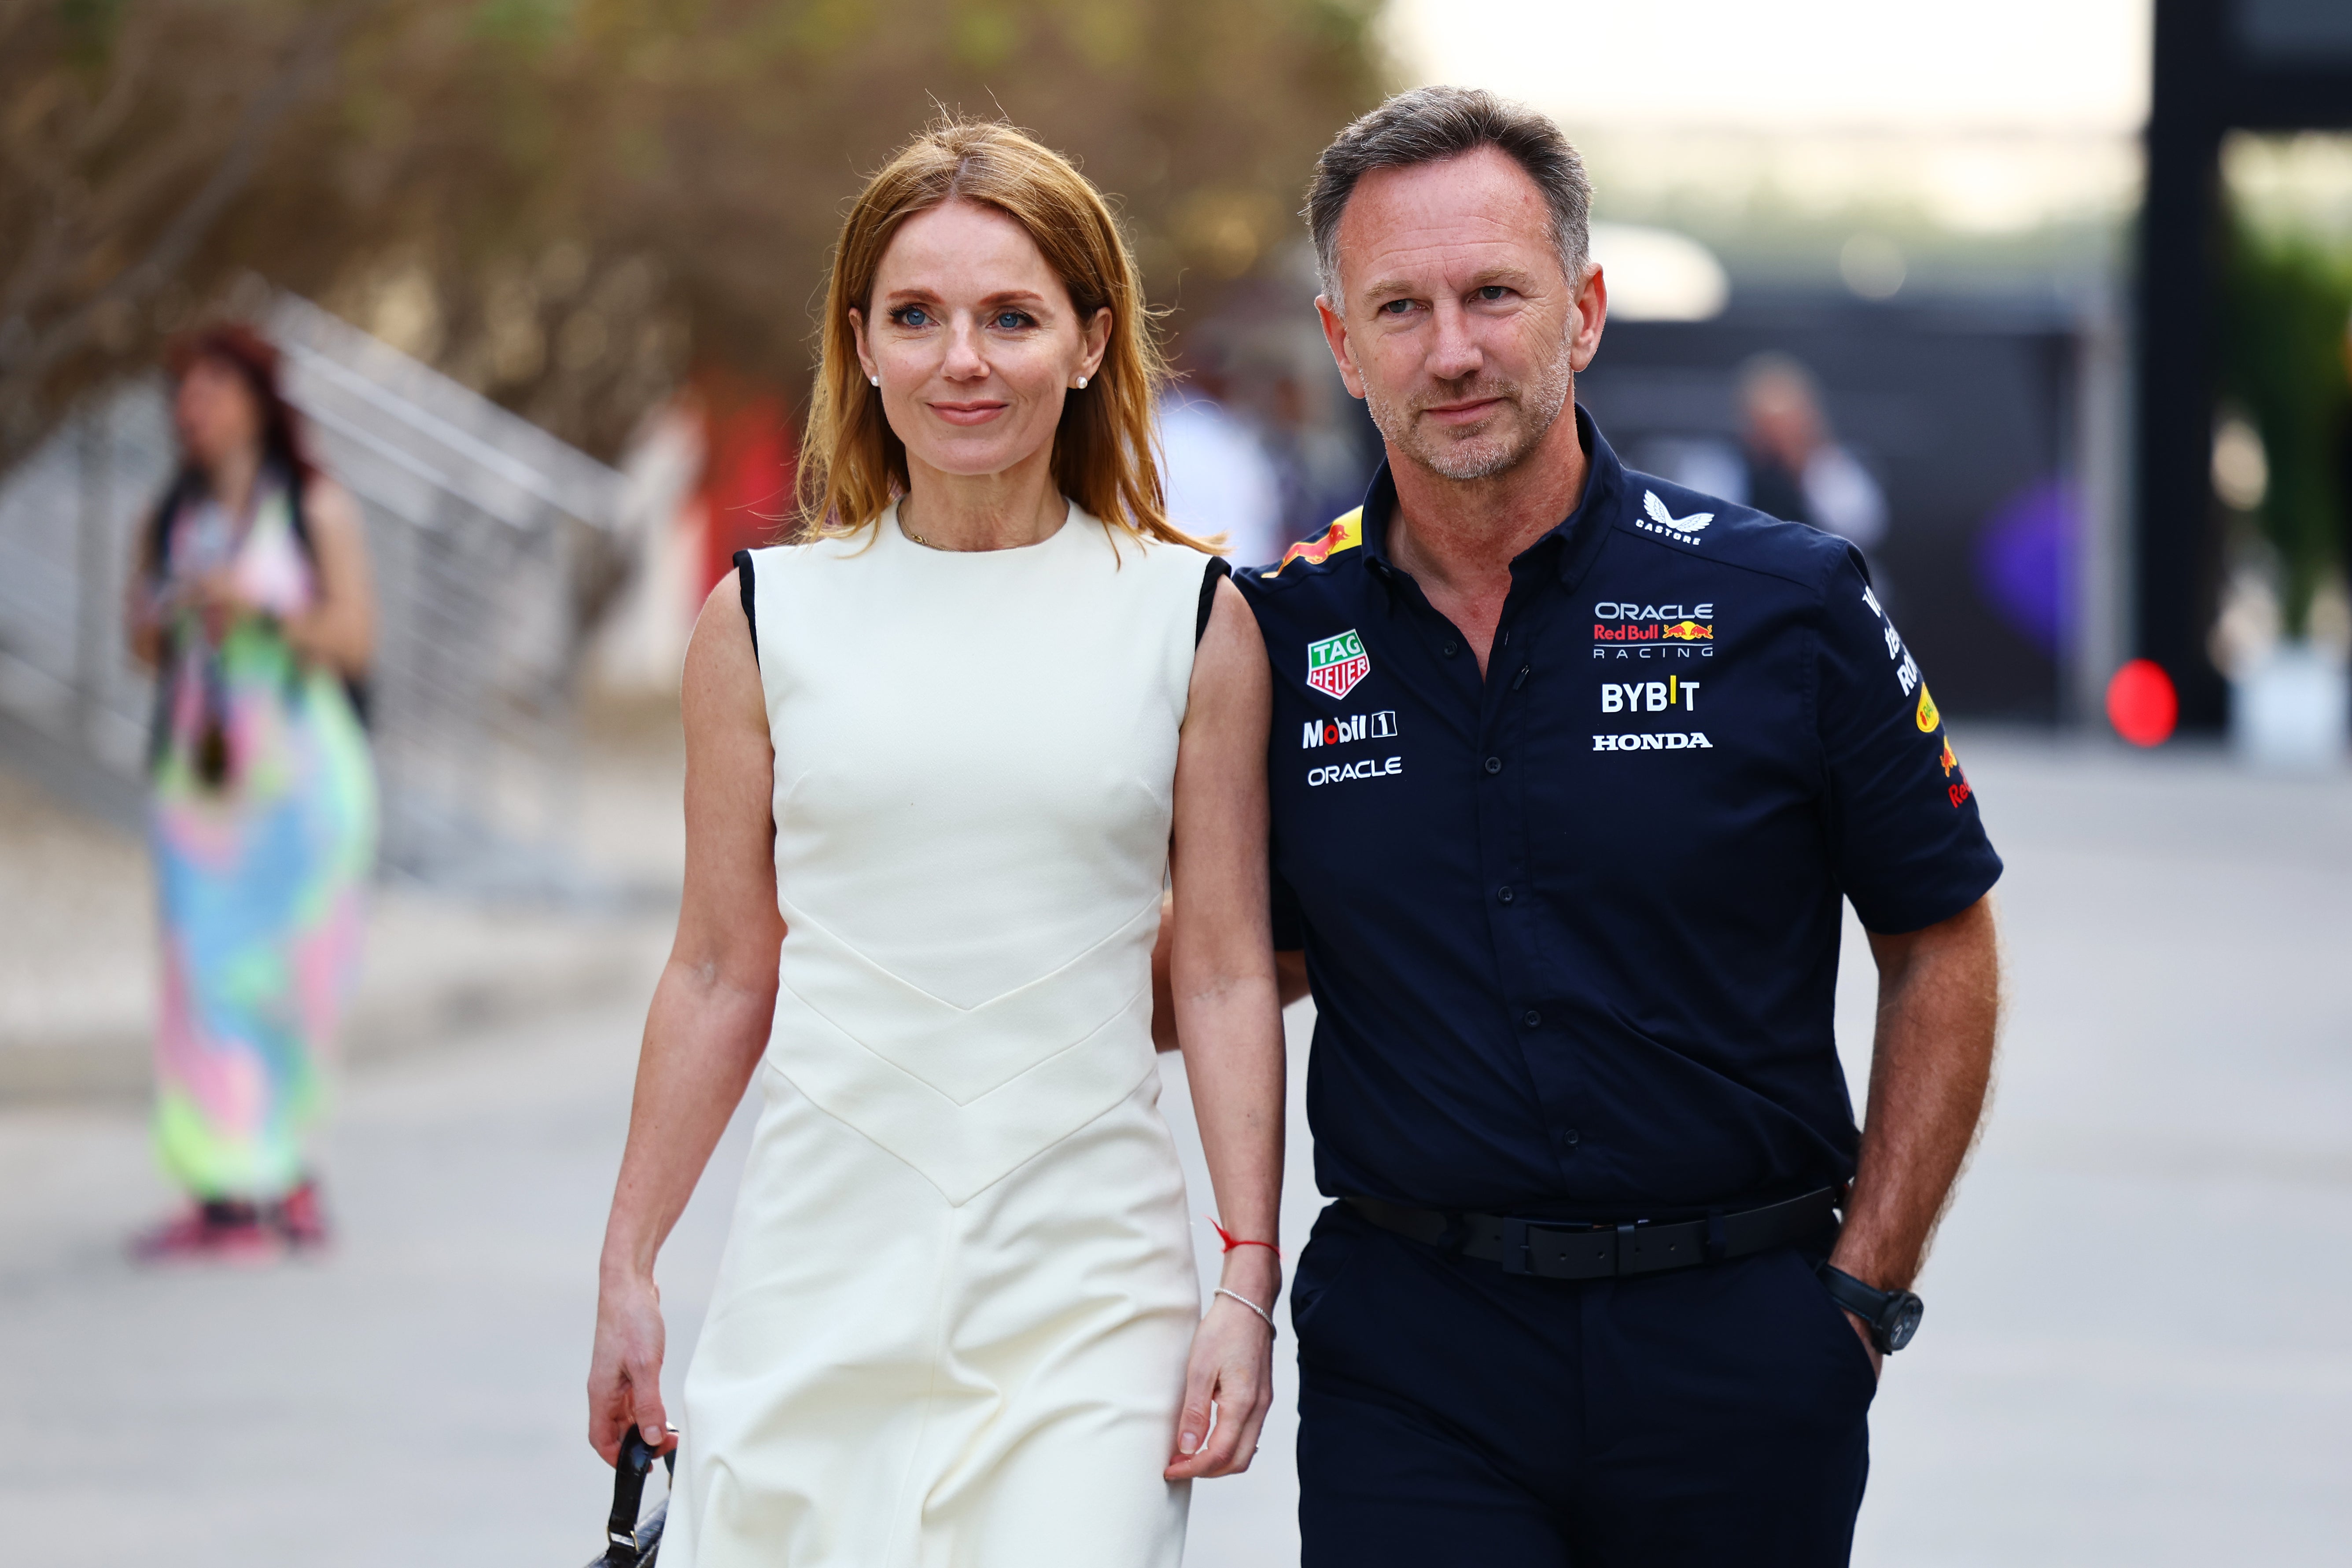 Horner was hand-in-hand with wife Geri Halliwell in the Bahrain paddock on Saturday